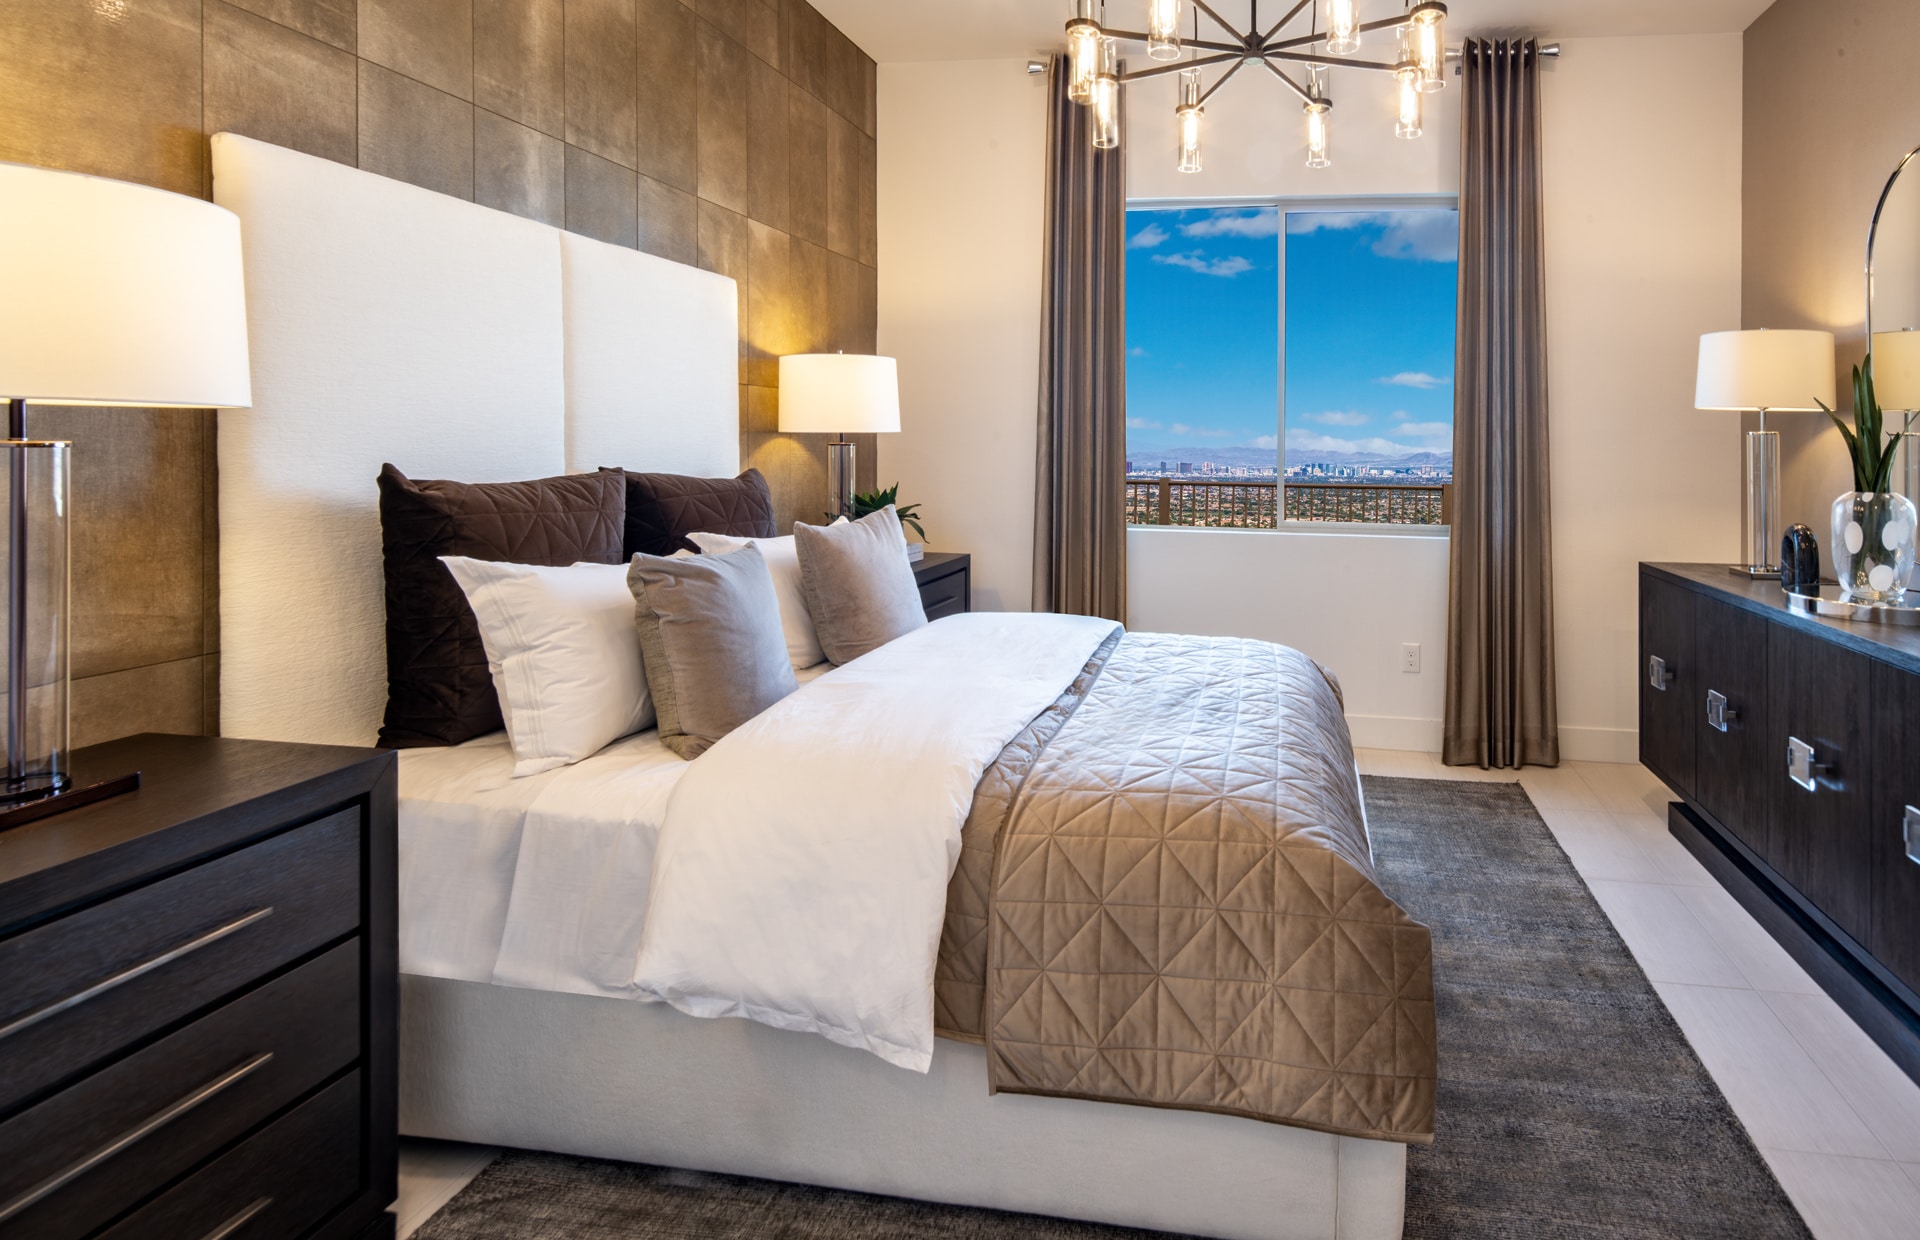 Bedroom of Pesaro Model at Carmel Cliff by Pulte Homes